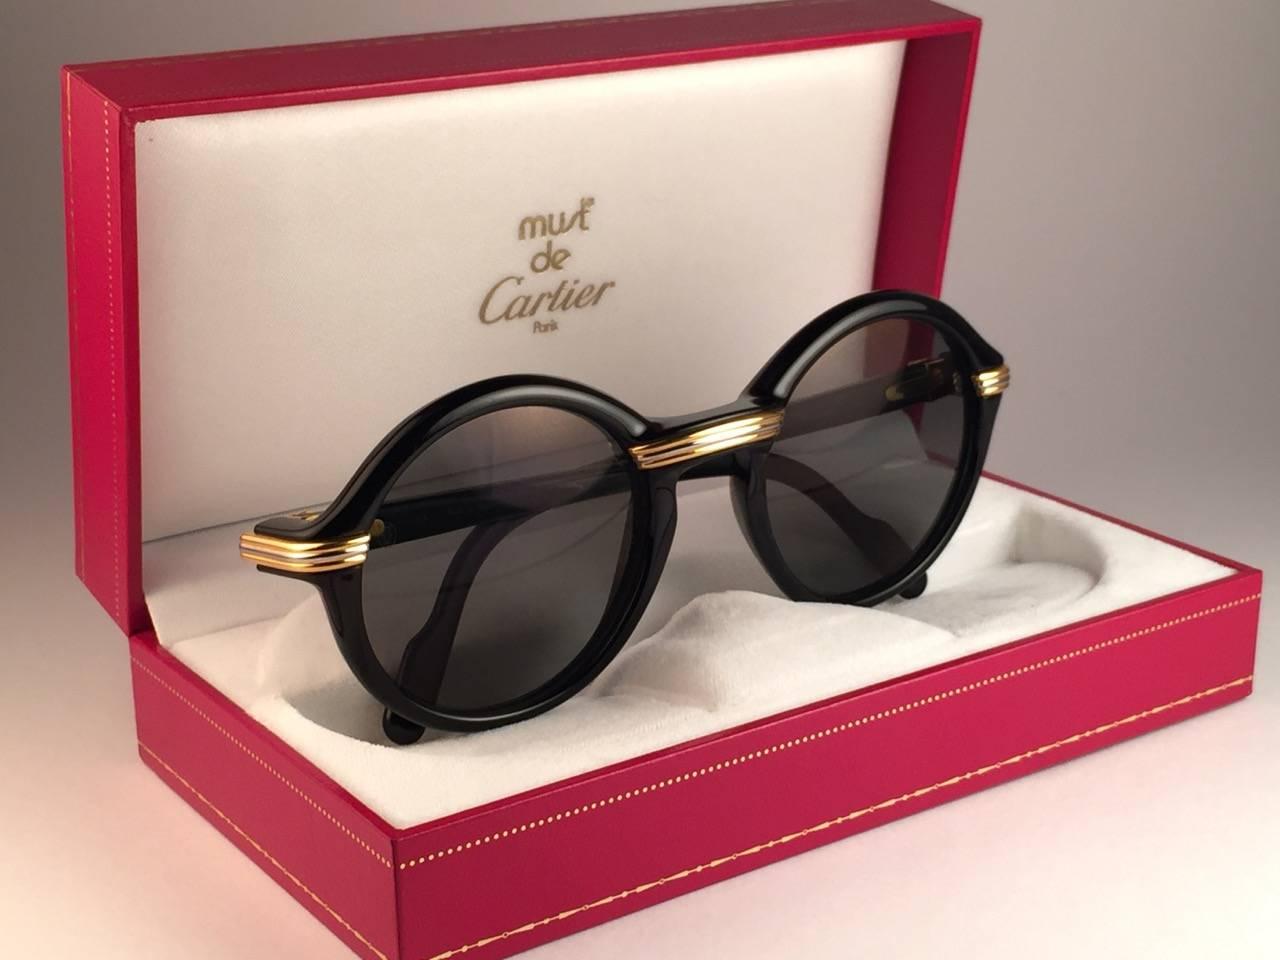 New 1991 Original Cartier Cabriolet Art Deco Black & Gold Sunglasses with grey ( uv protection ) lenses
Frame has the famous real gold and white gold accents in the middle and on the sides. 
All hallmarks. Cartier gold signs on the earpaddles. Both